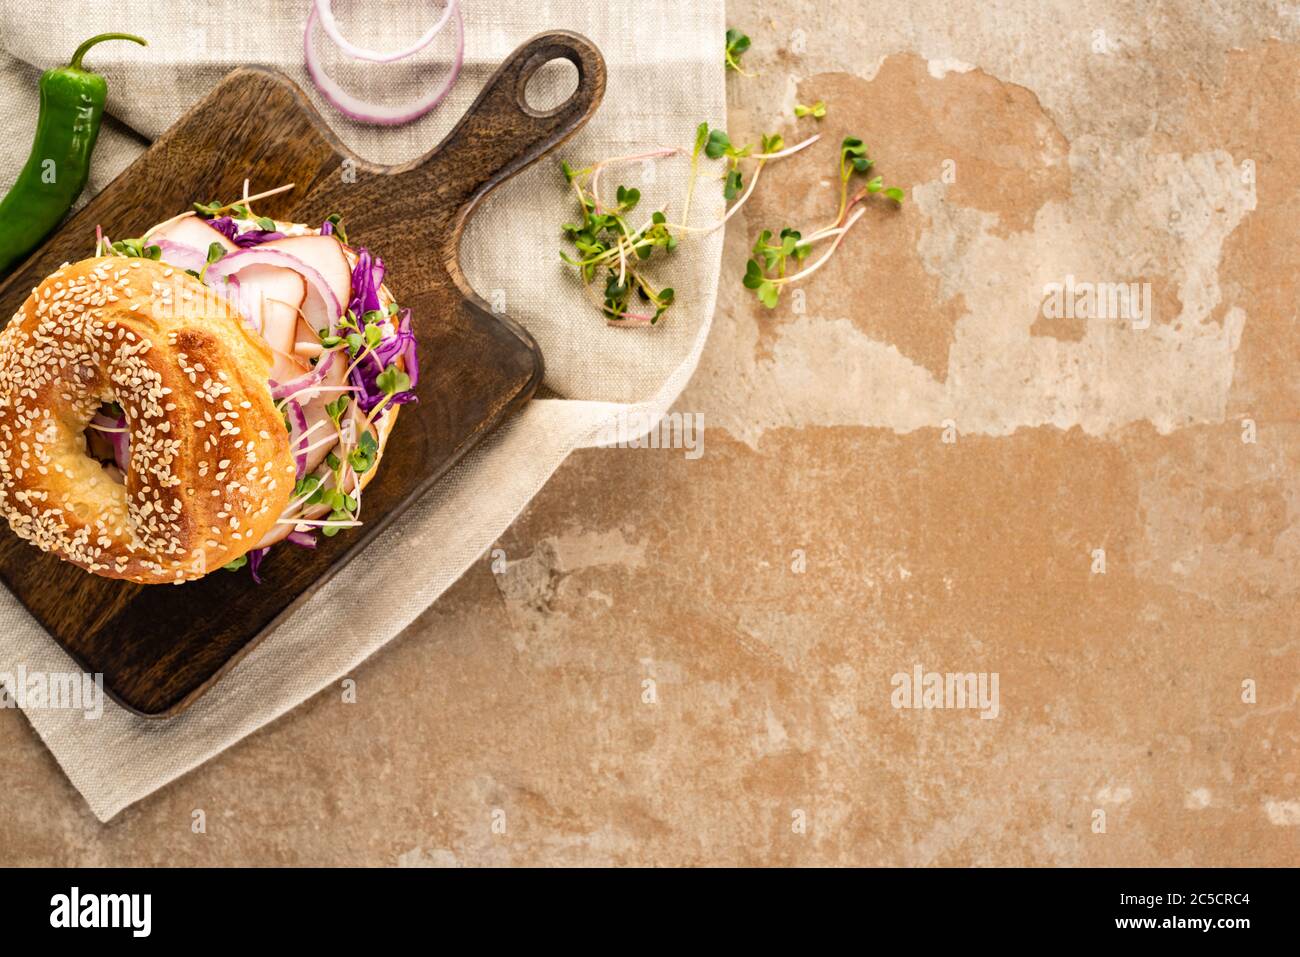 top view of fresh delicious bagel with meat, red onion and sprouts on wooden cutting board on napkin with jalapenos on aged beige surface Stock Photo